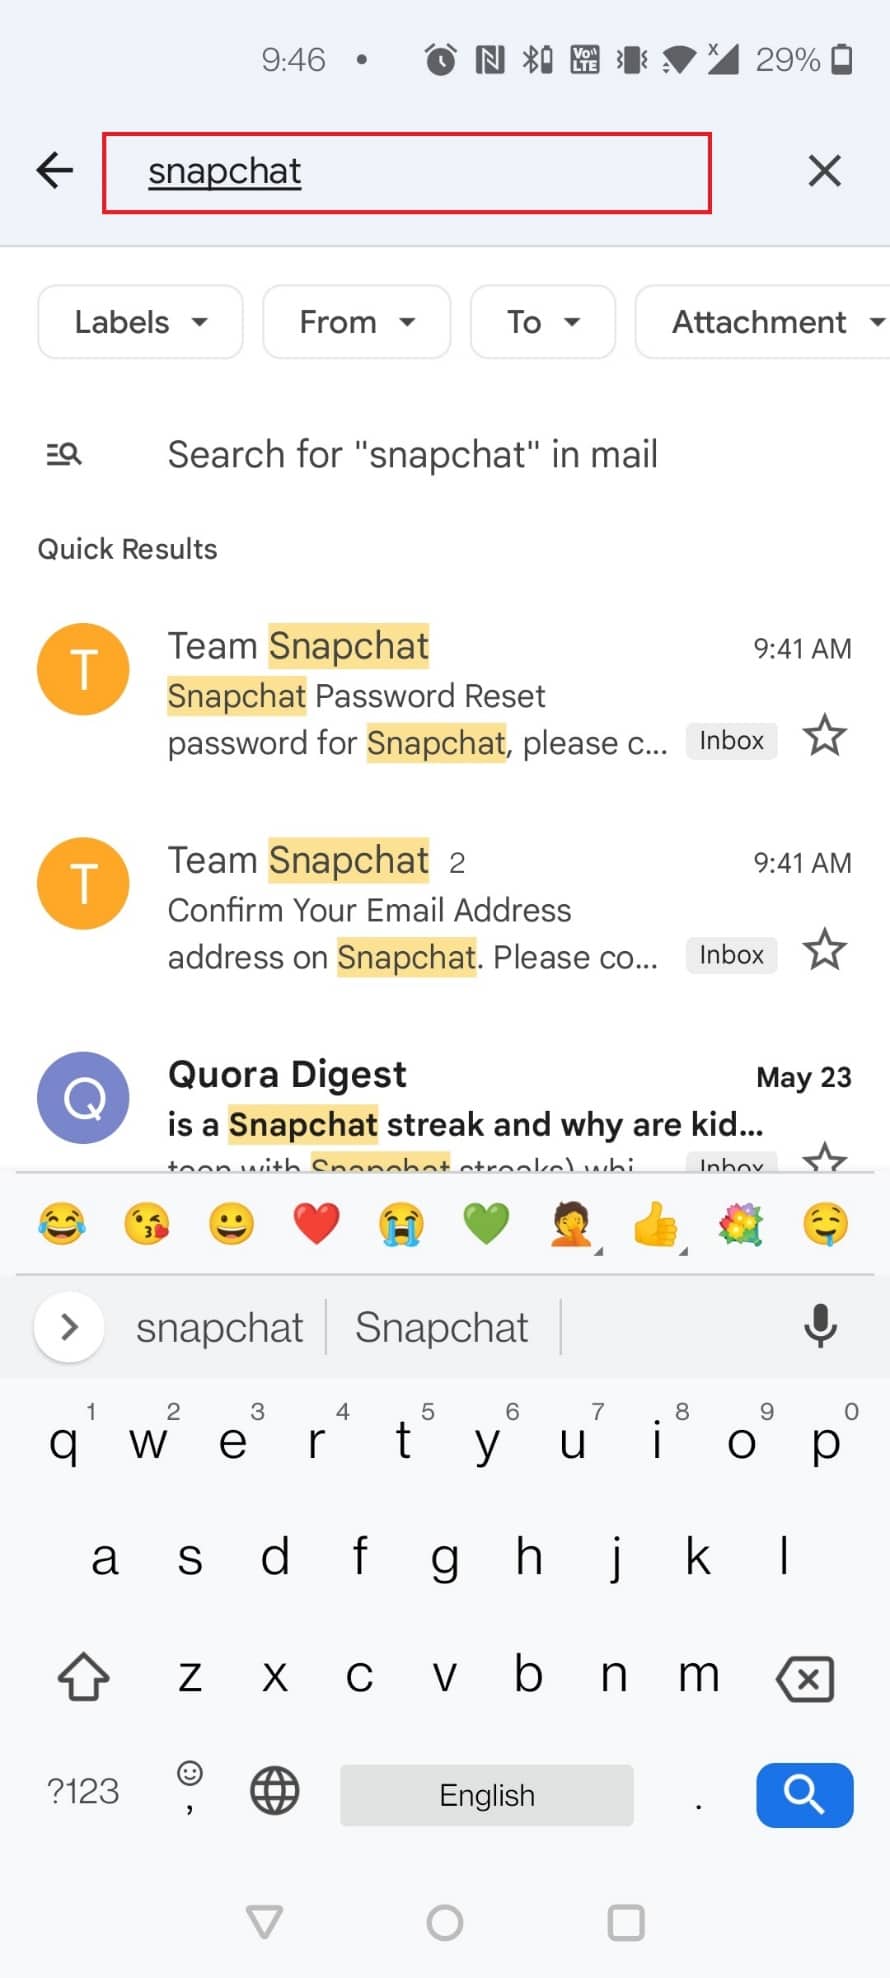 Type Snapchat in the search bar